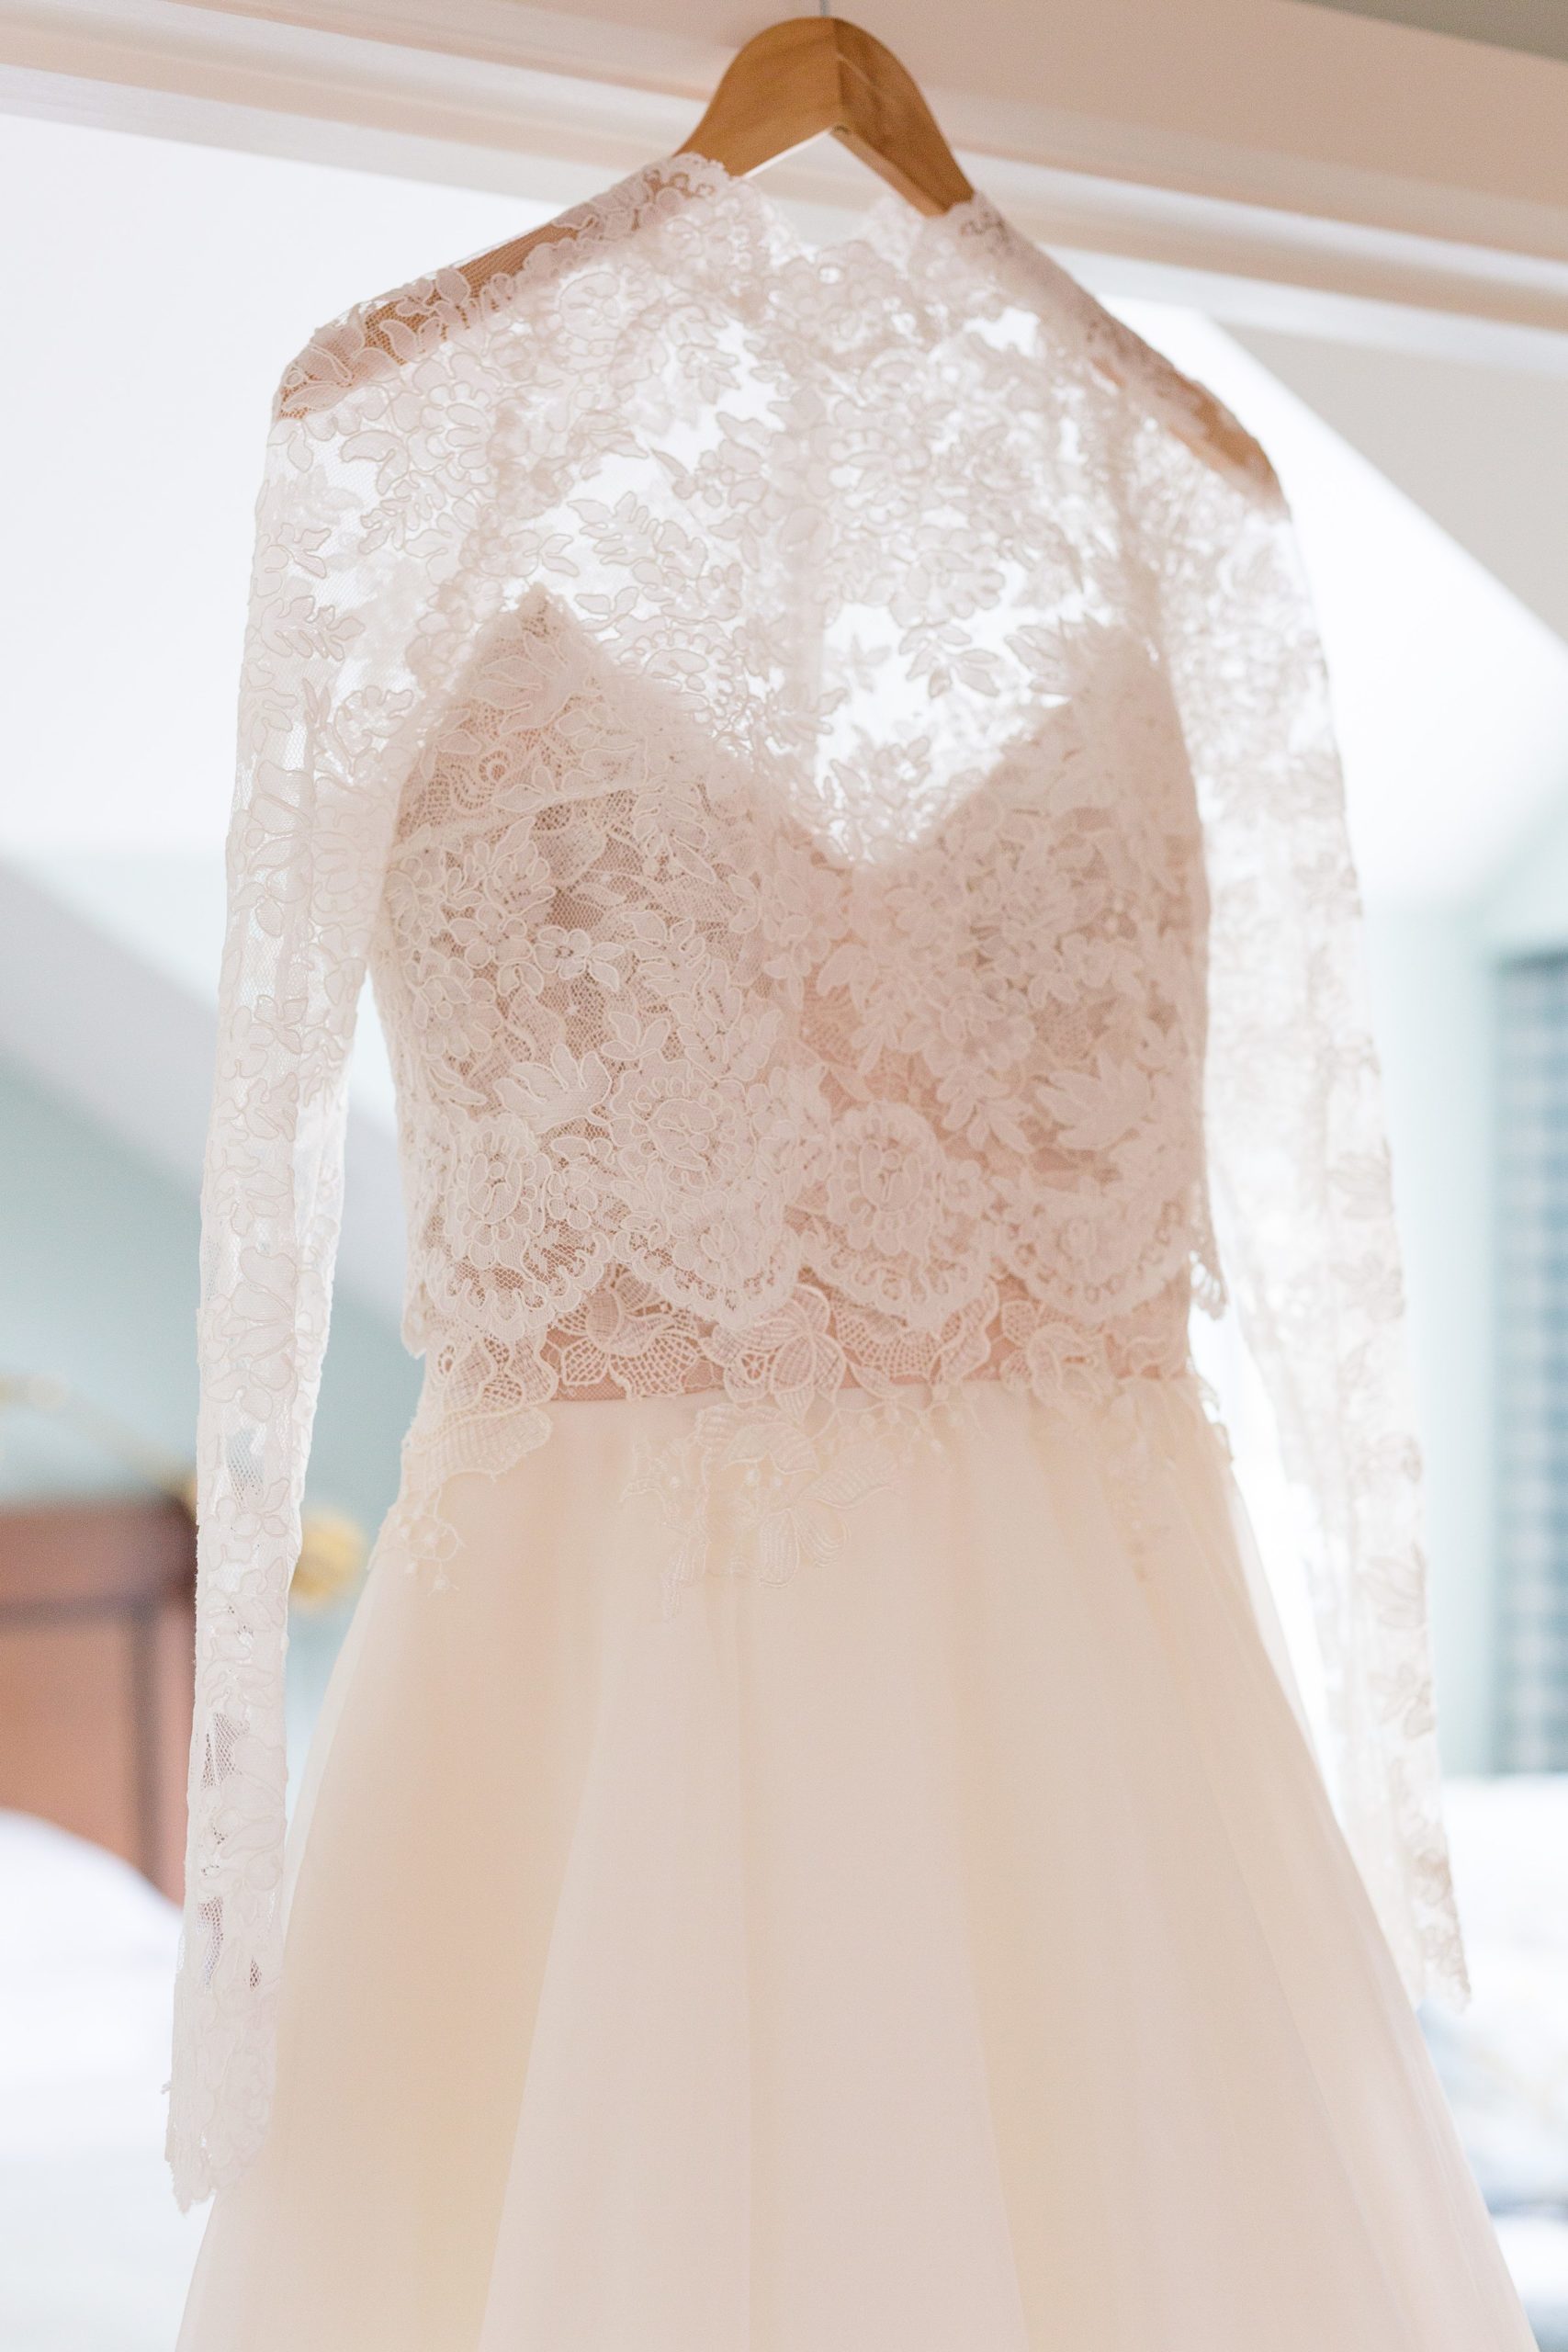 Long sleeve lace winter wedding dress hanging in the window